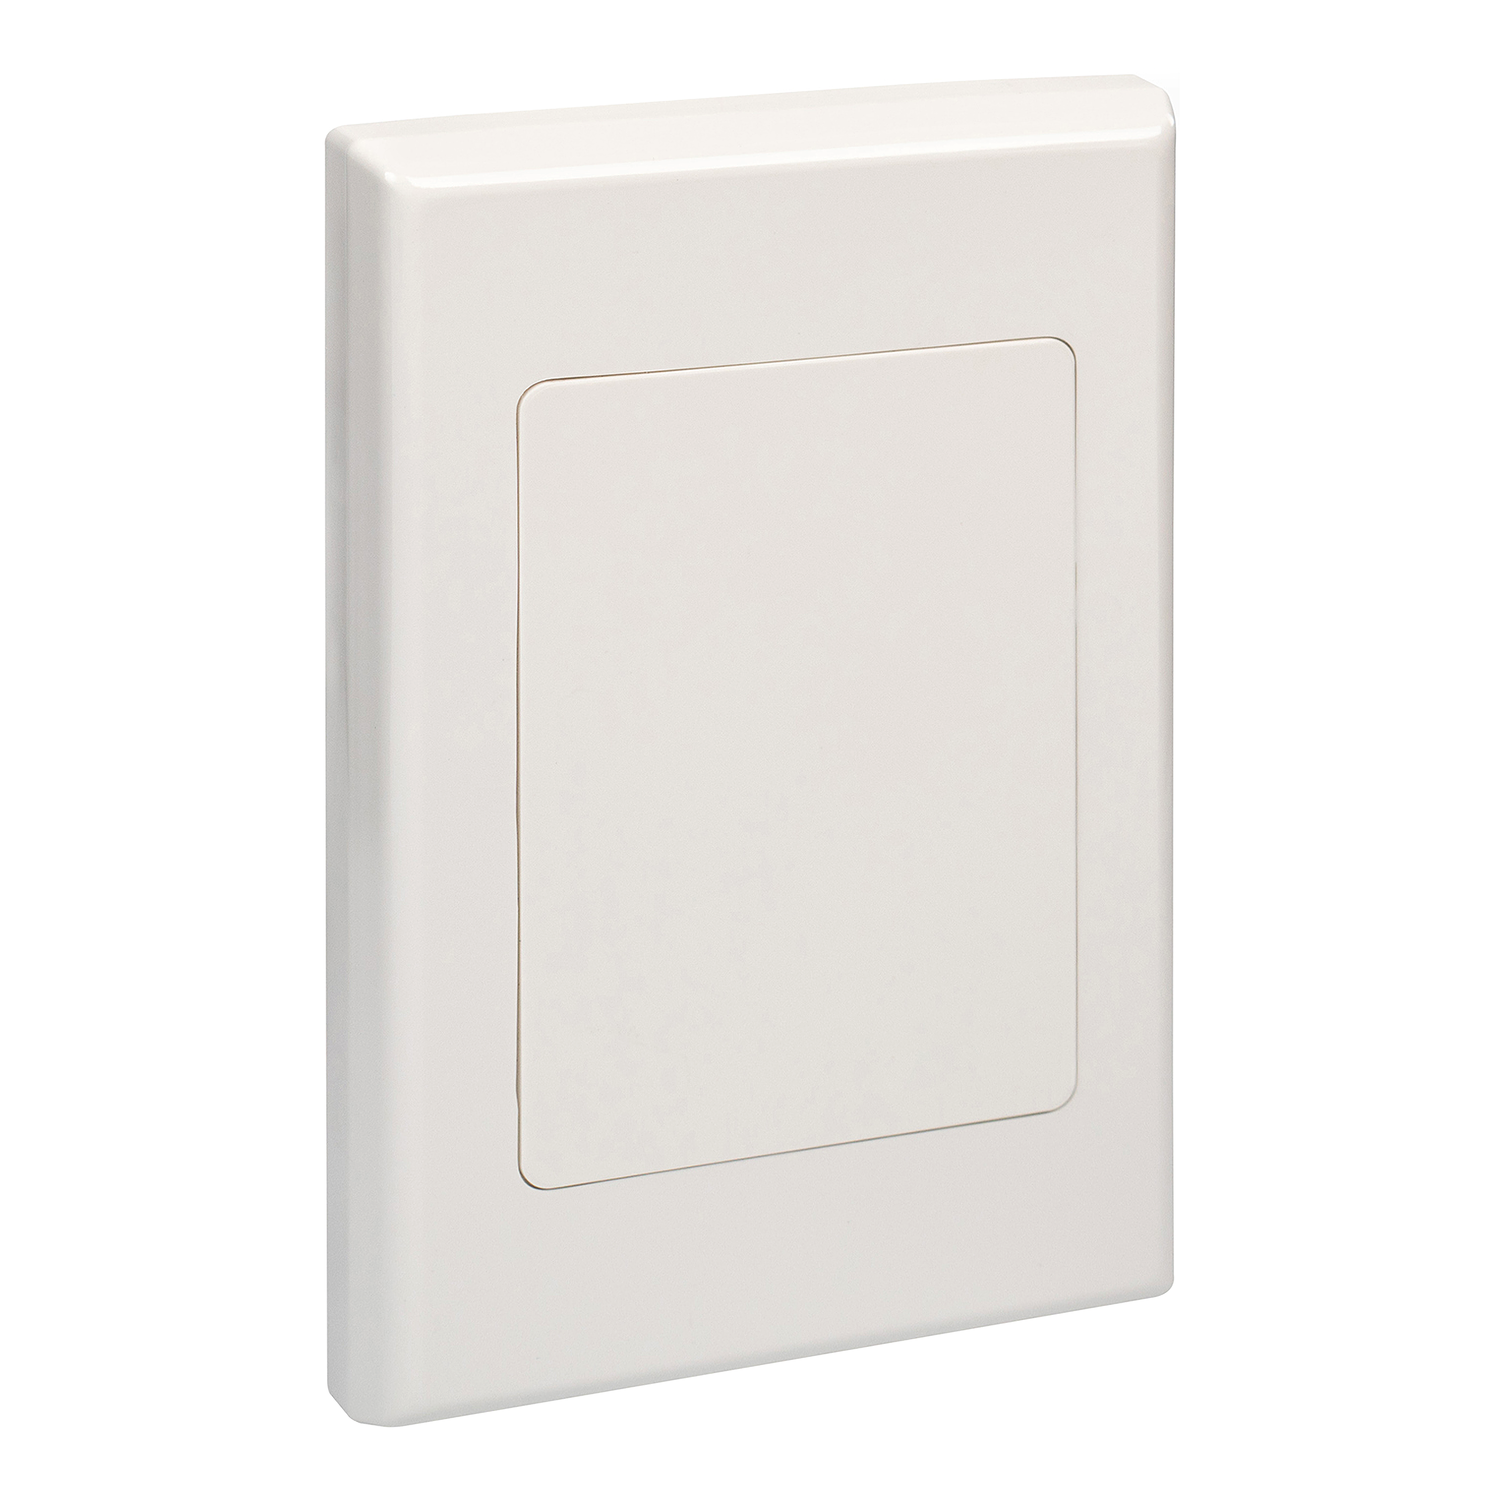 PDL 600 Series - Grid + Blank Cover Plate - White